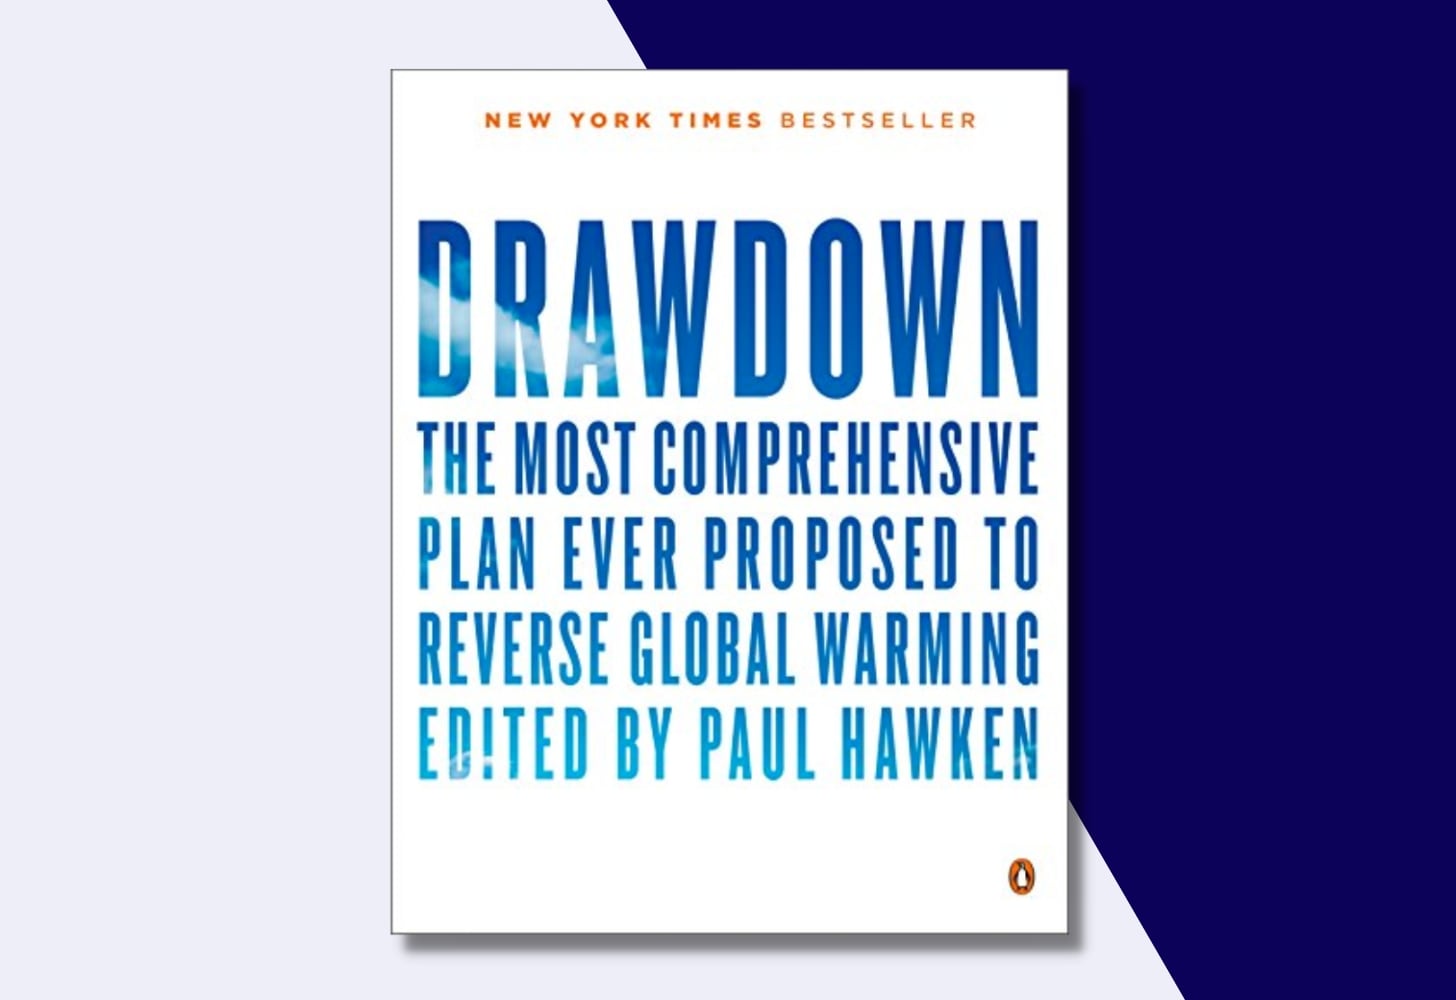 “Drawdown: The Most Comprehensive Plan Ever Proposed to Reverse Global Warming” by Paul Hawken